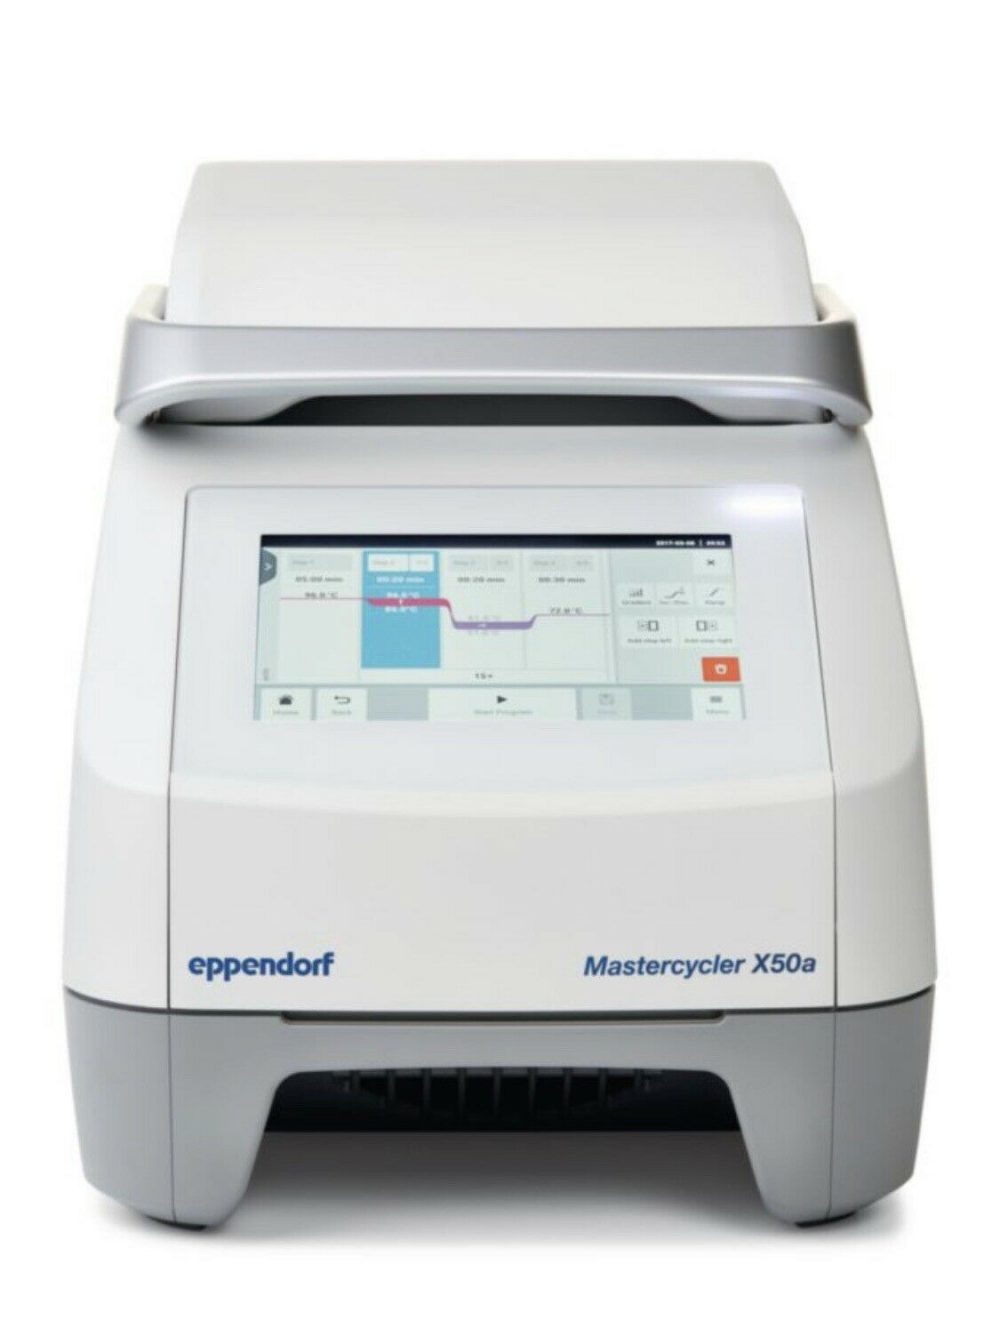 Eppendorf Mastercycler X50 Thermal Cycler